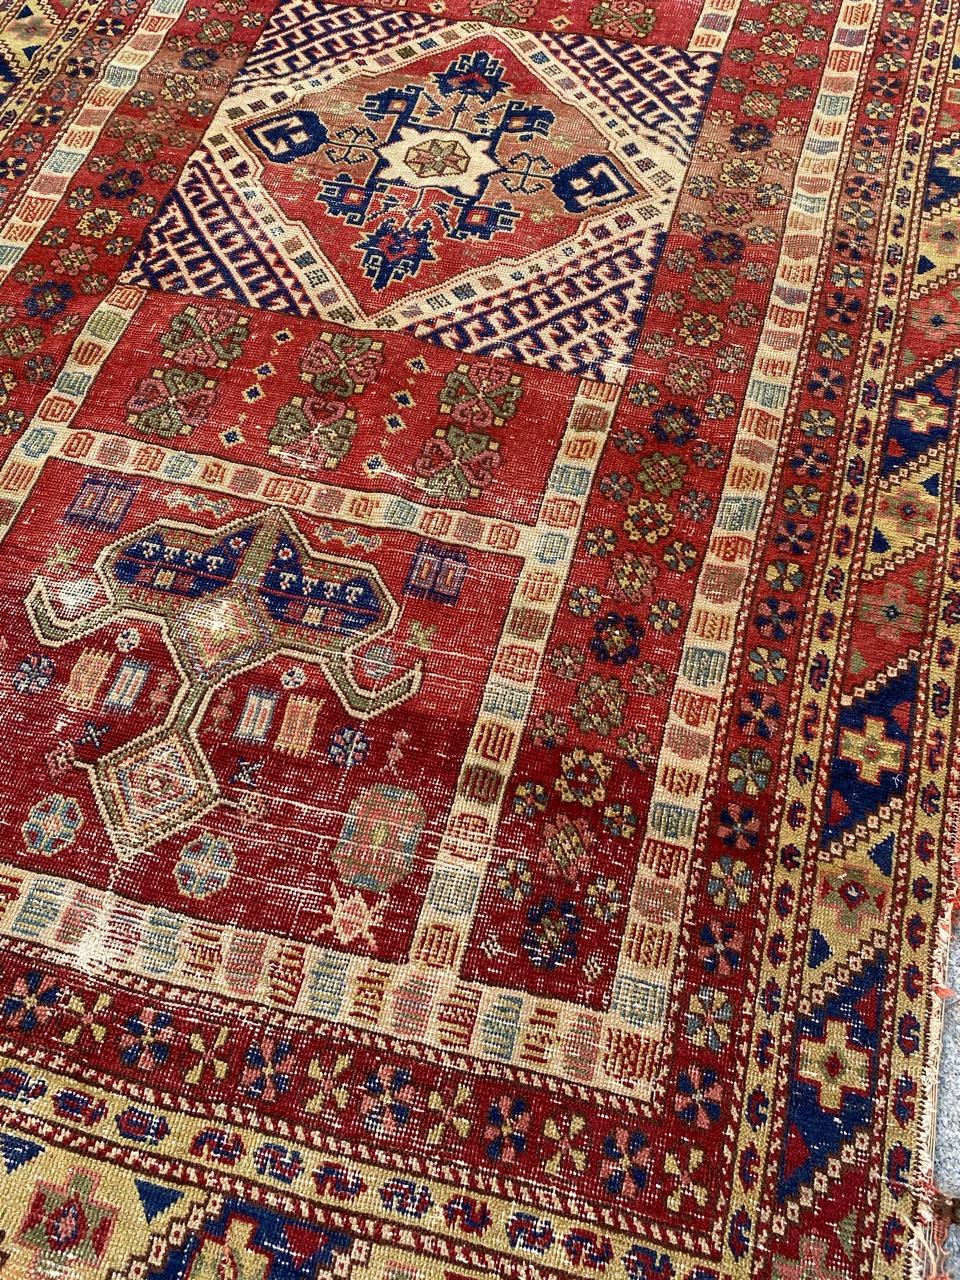 Exquisite early 20th-century Turkish rug, boasting a stunning decorative design with vibrant colors including red, blue, yellow, green, and pink. This hand-knotted masterpiece features a wool velvet pile on a cotton foundation. The rich brick red